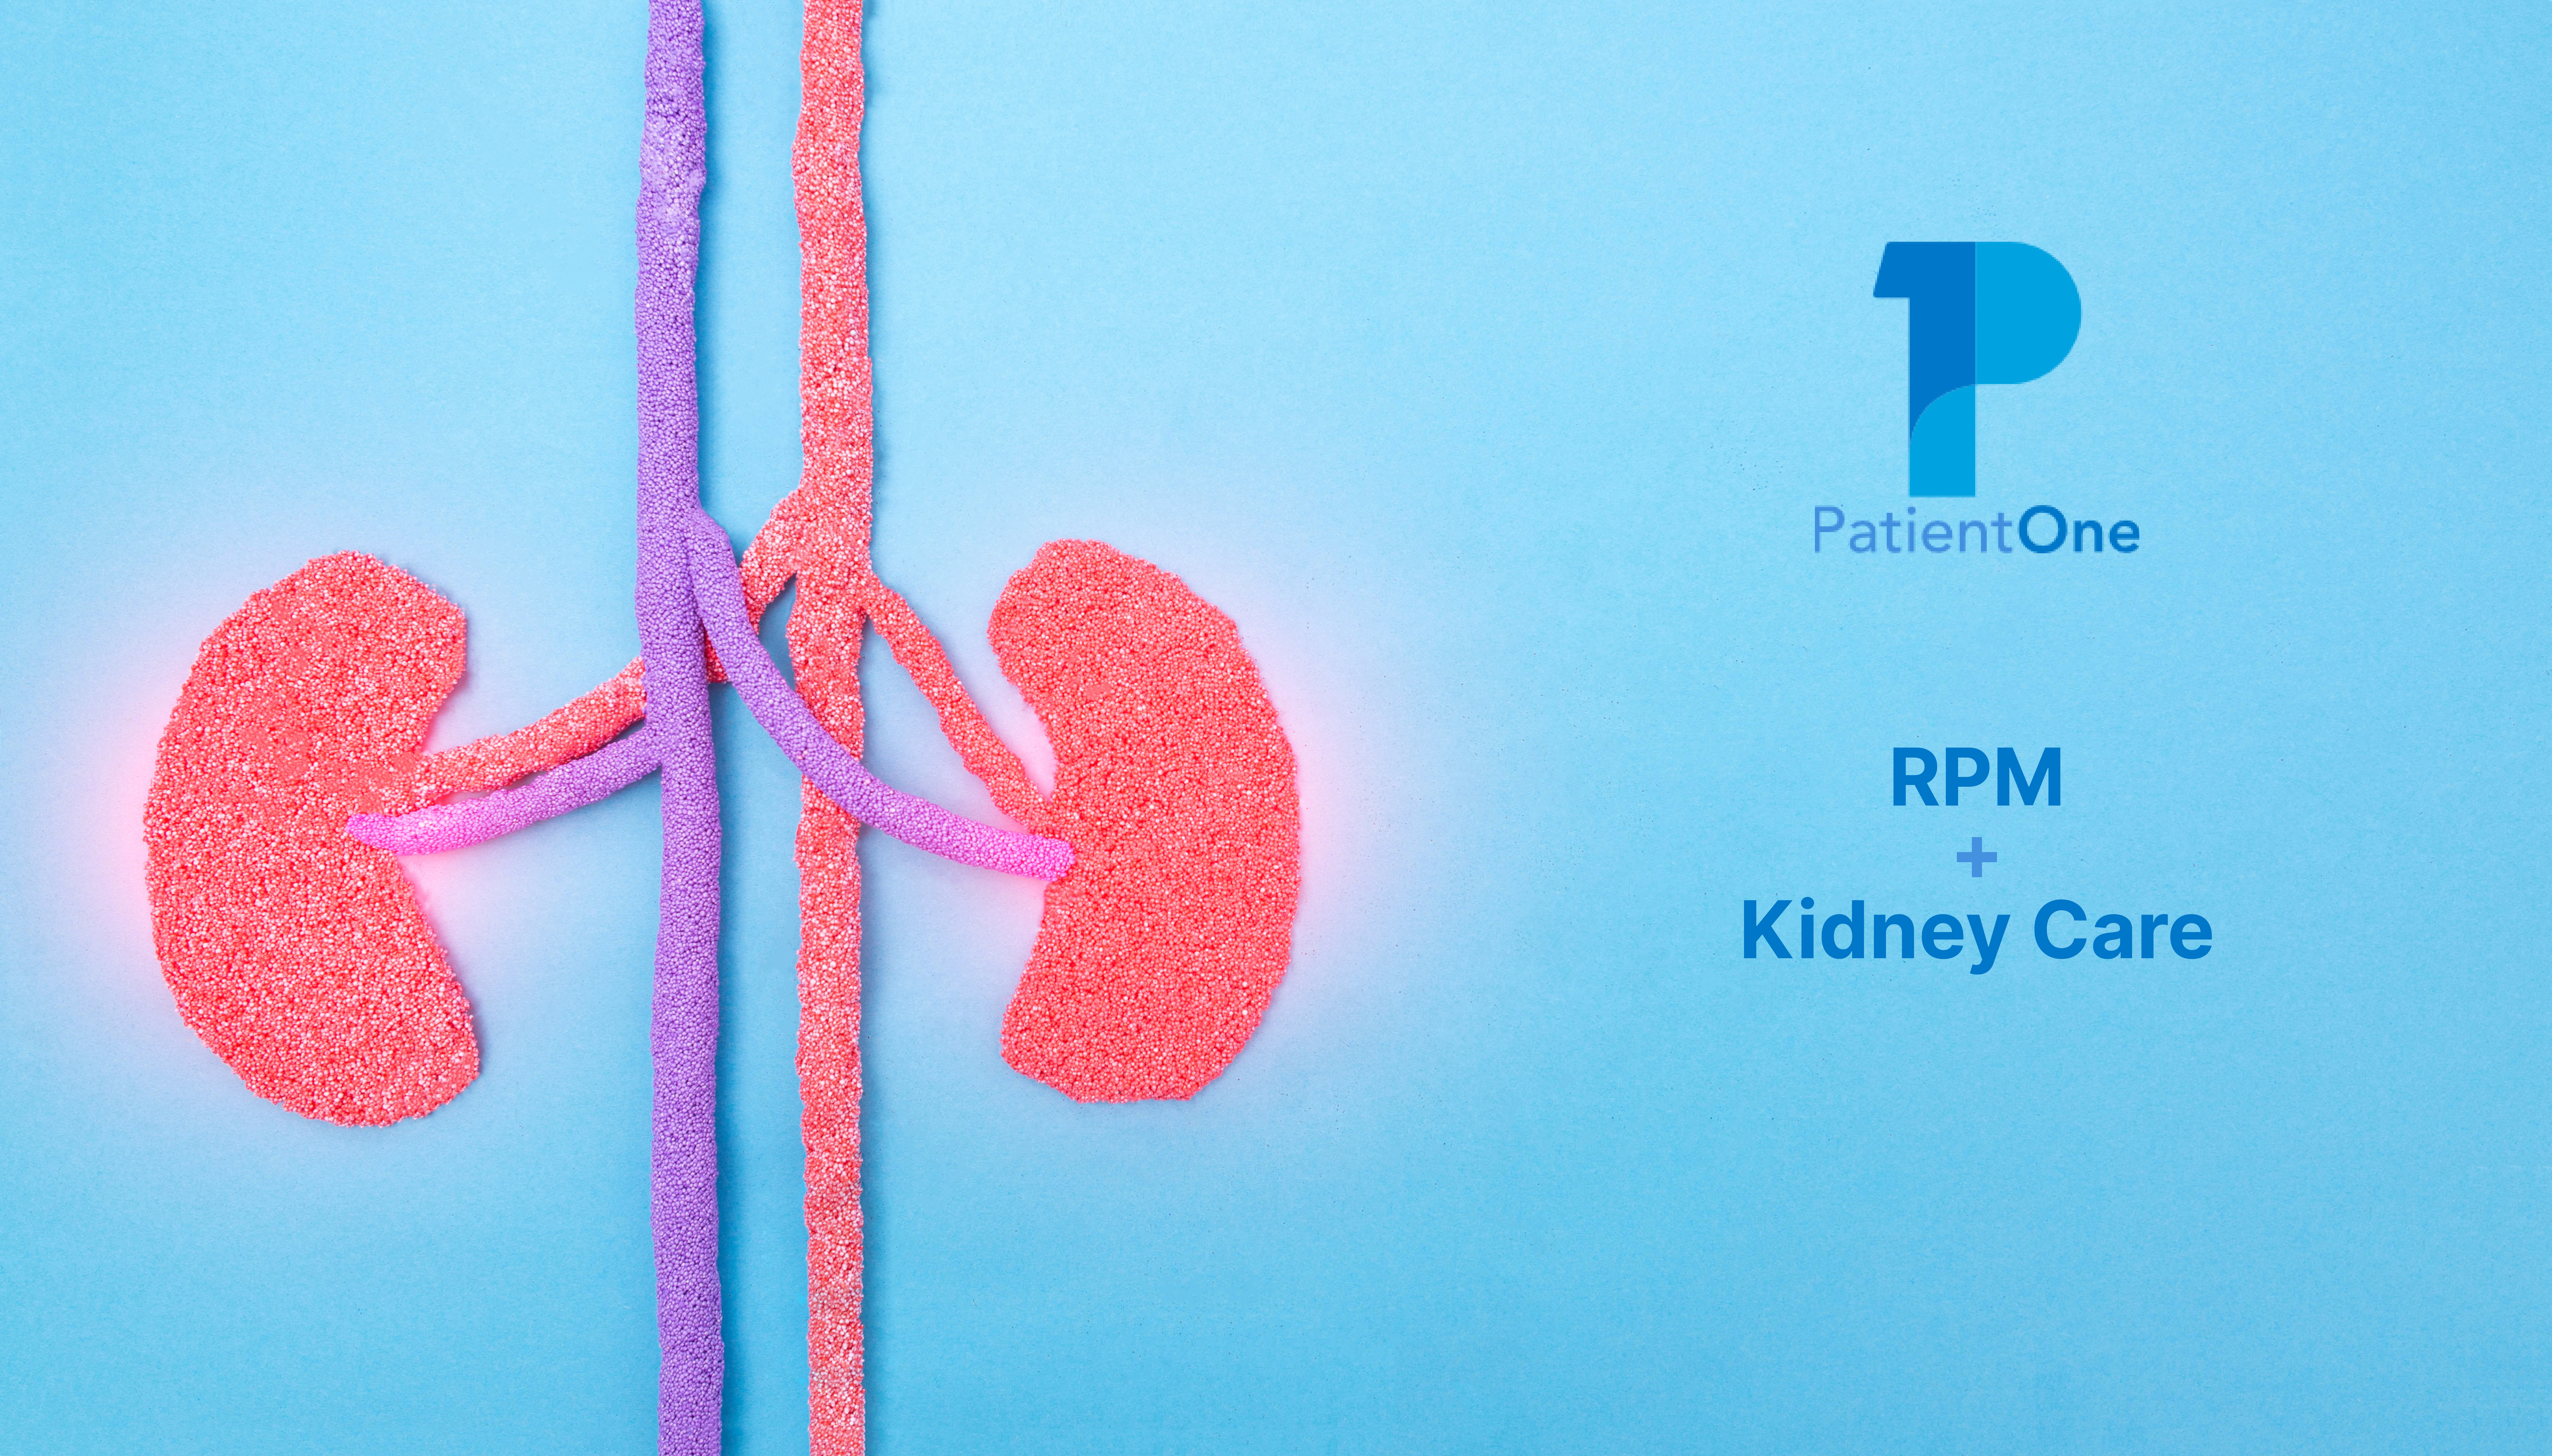 How To Leverage Remote Patient Monitoring (RPM) to Address Gaps in Kidney Care